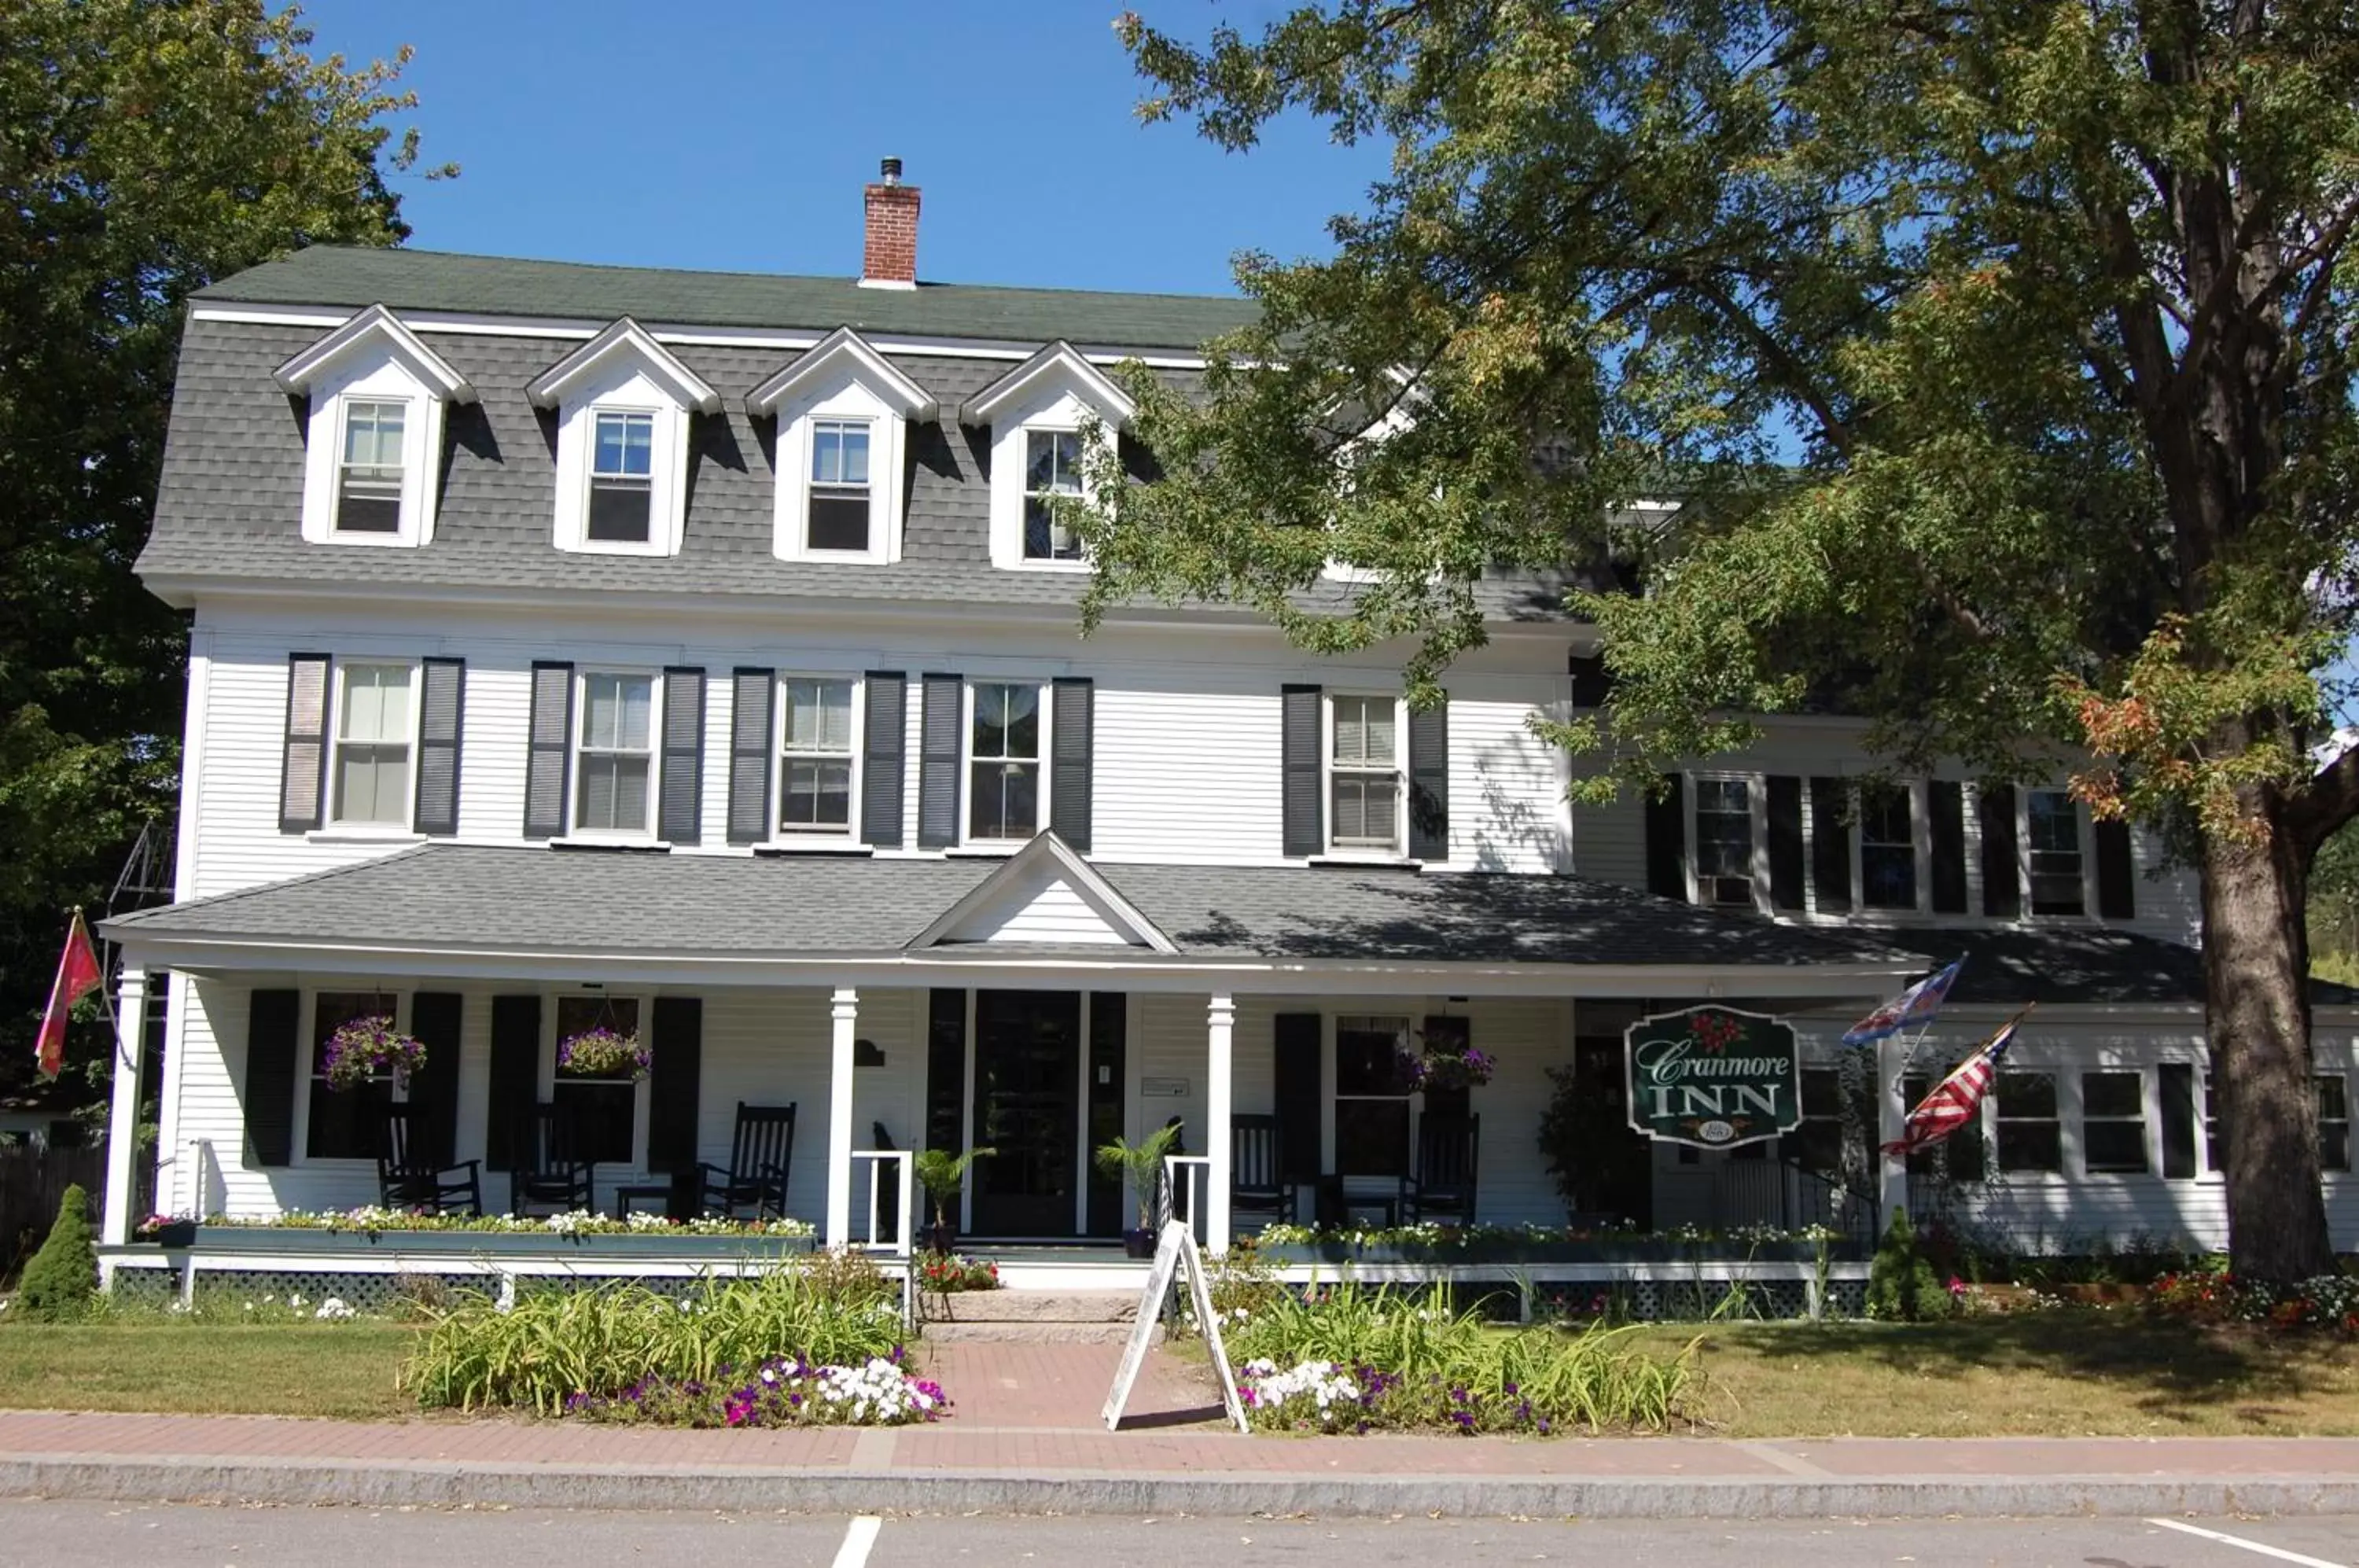 Facade/entrance, Property Building in Cranmore Inn and Suites, a North Conway boutique hotel